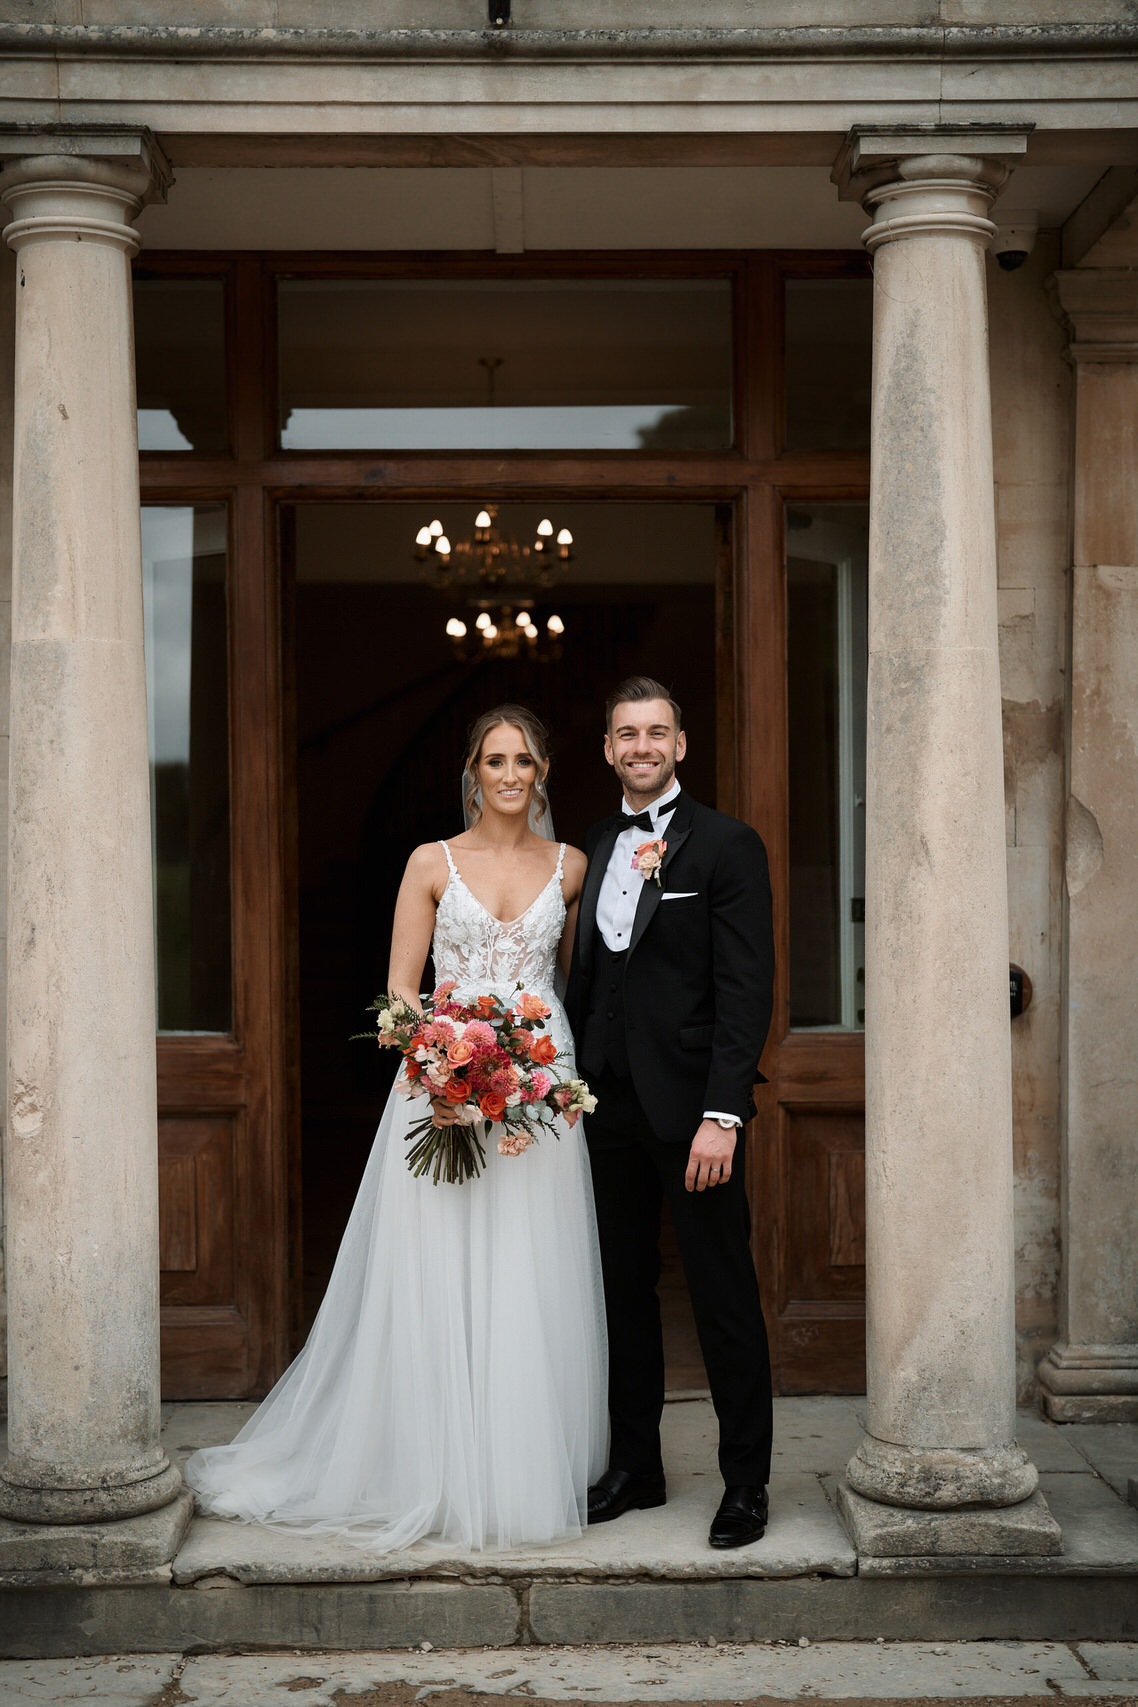 A bride and groom standing in front of an ornate doorway.